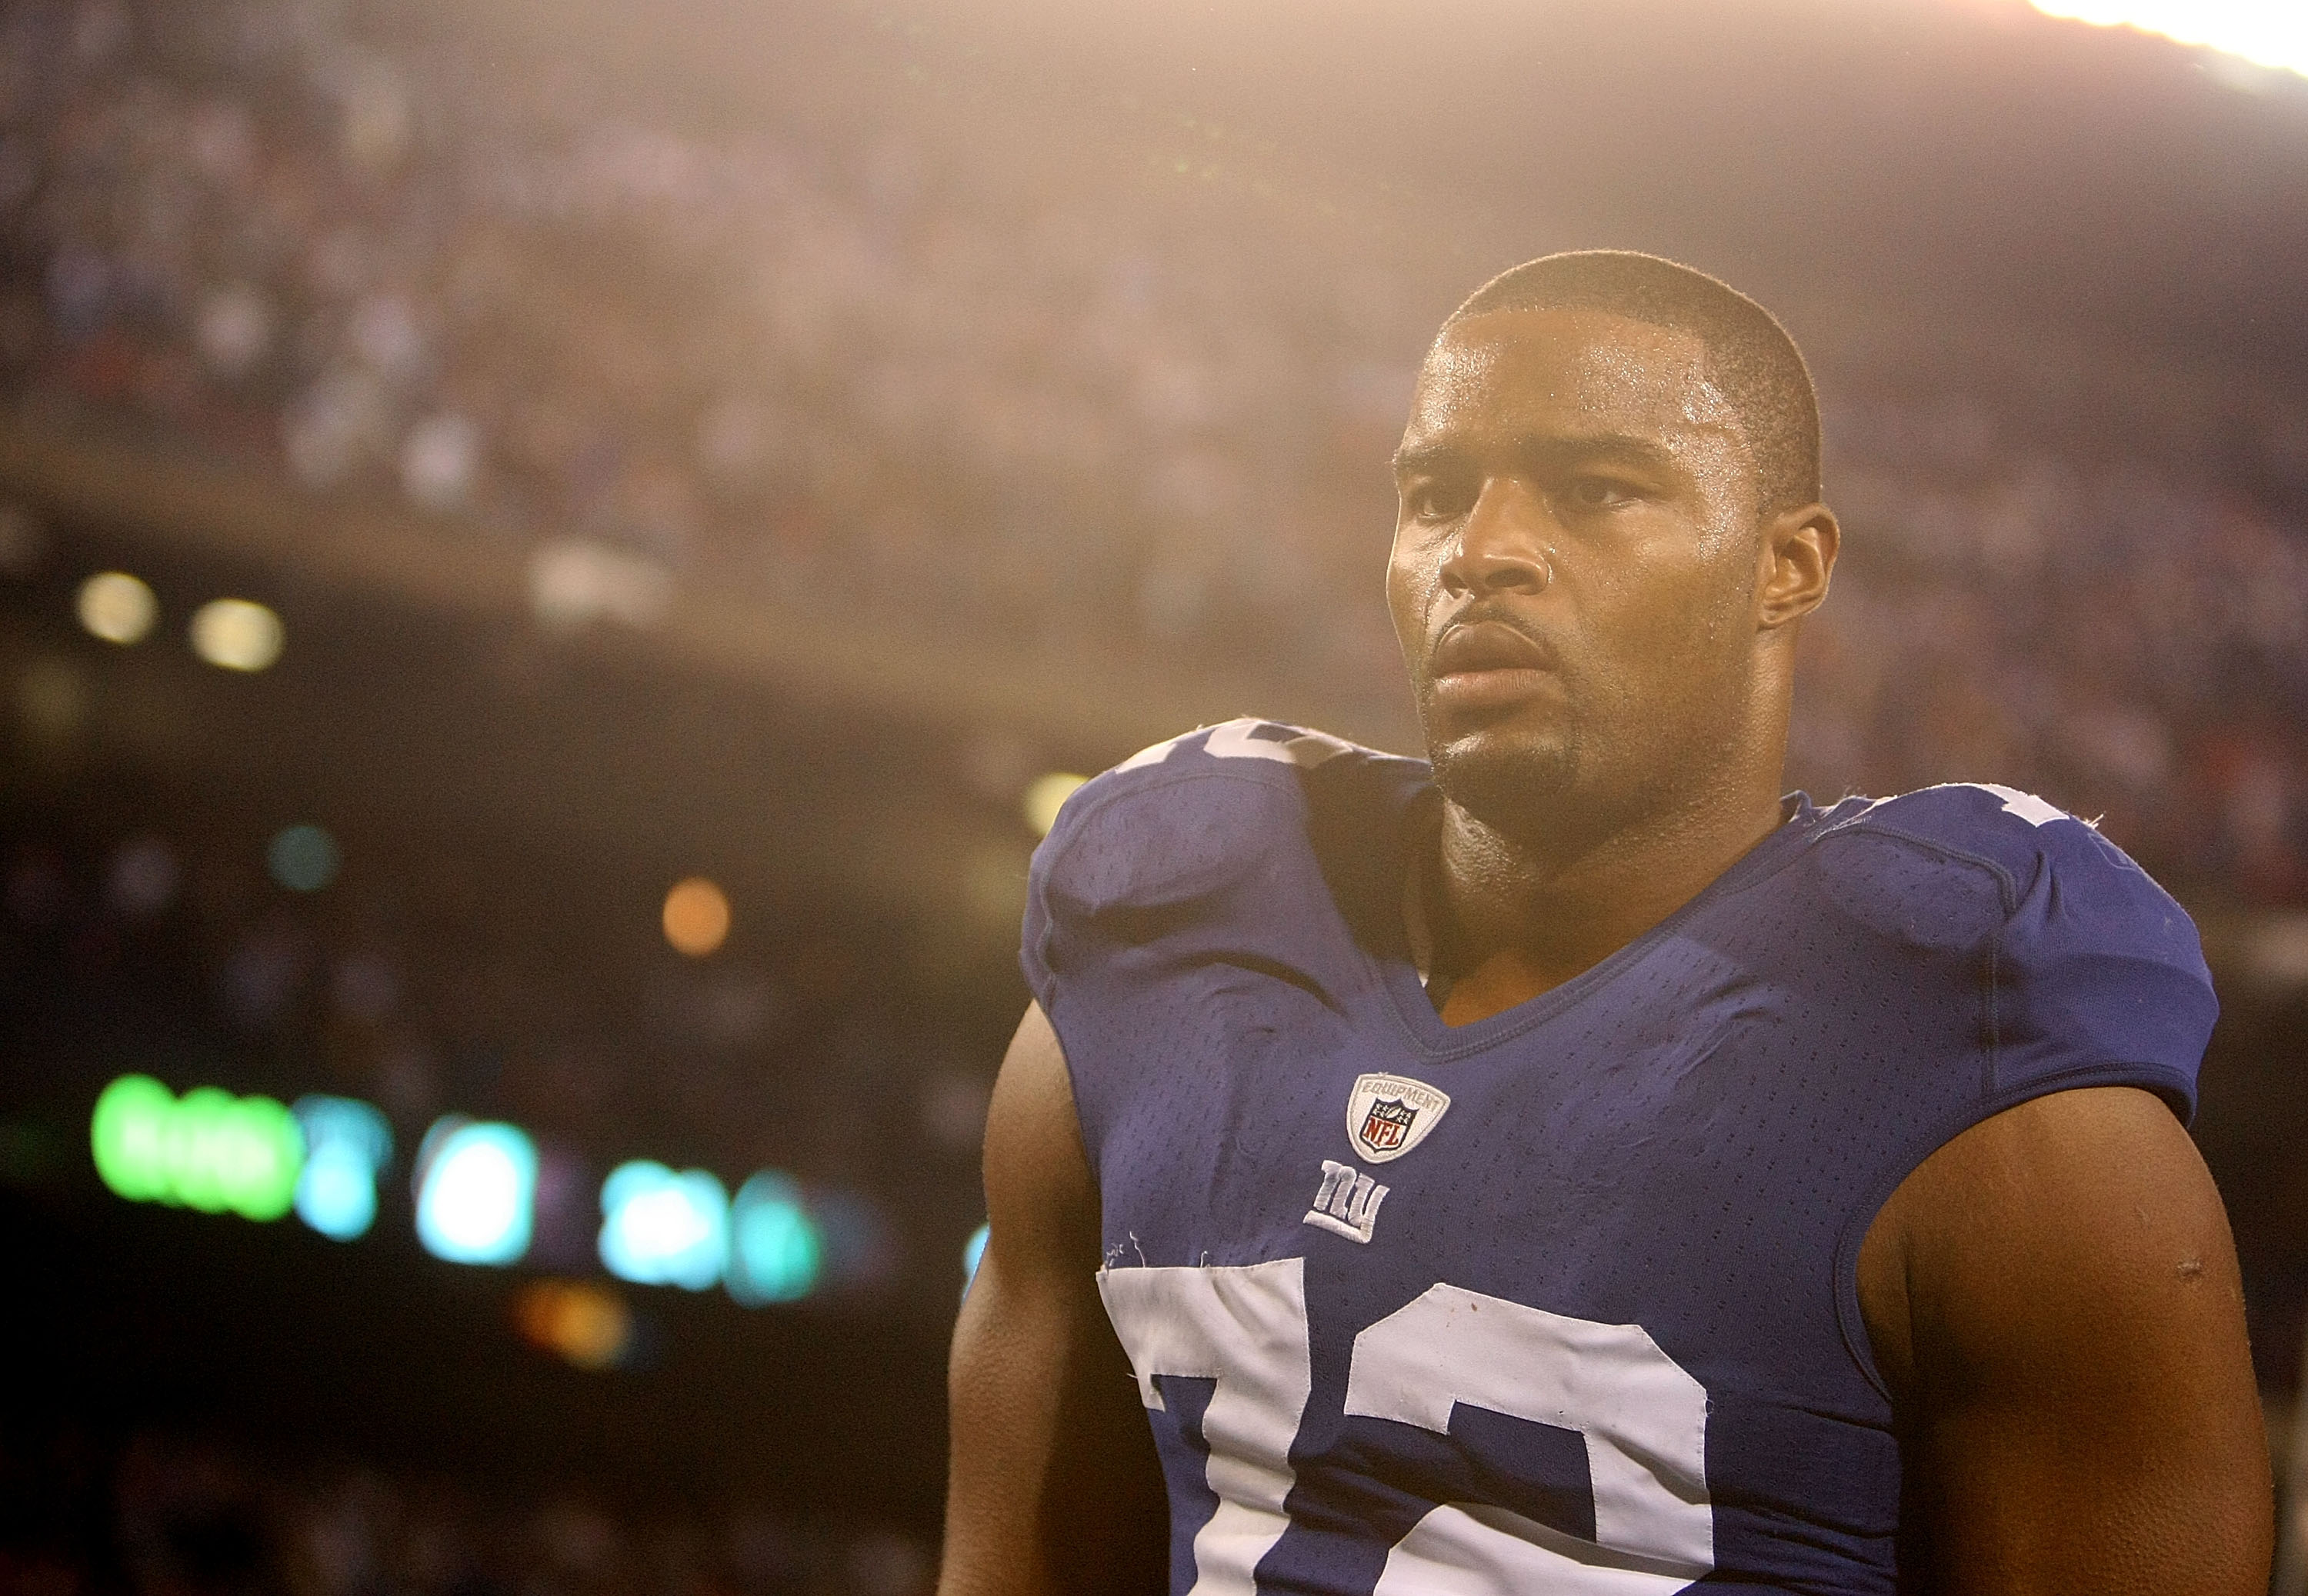 EAST RUTHERFORD, NJ - NOVEMBER 08: Osi Umenyiora #72 of the New York Giants leaves the field after a loss to  the San Diego Chargers at Giants Stadium on November 8, 2009 in East Rutherford, New Jersey.  (Photo by Nick Laham/Getty Images)